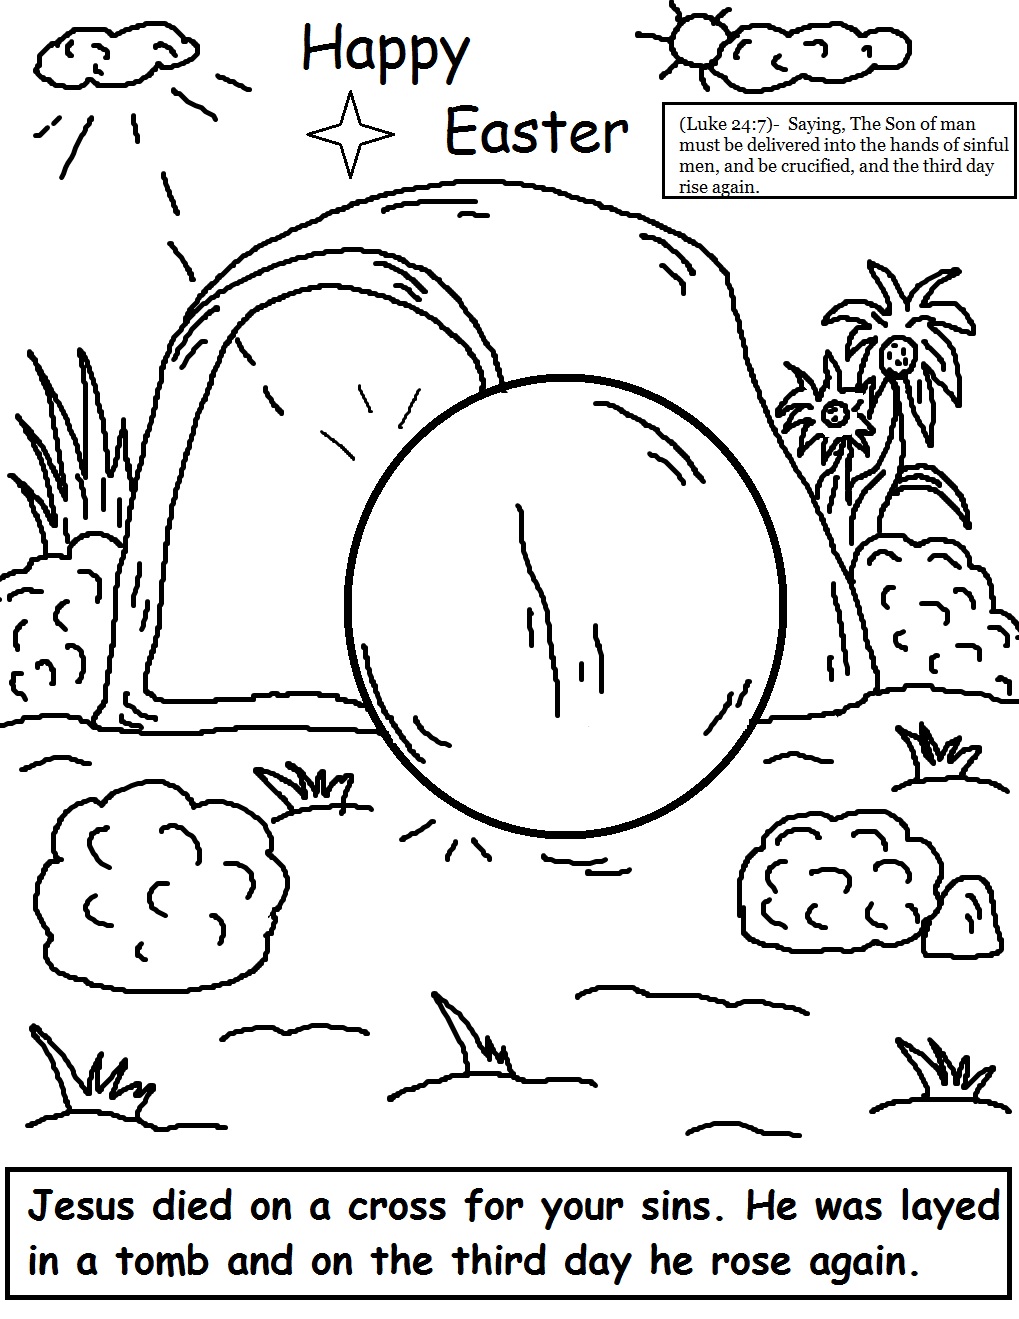 Kids Coloring Pages Easter gt;gt; Disney Coloring Pages